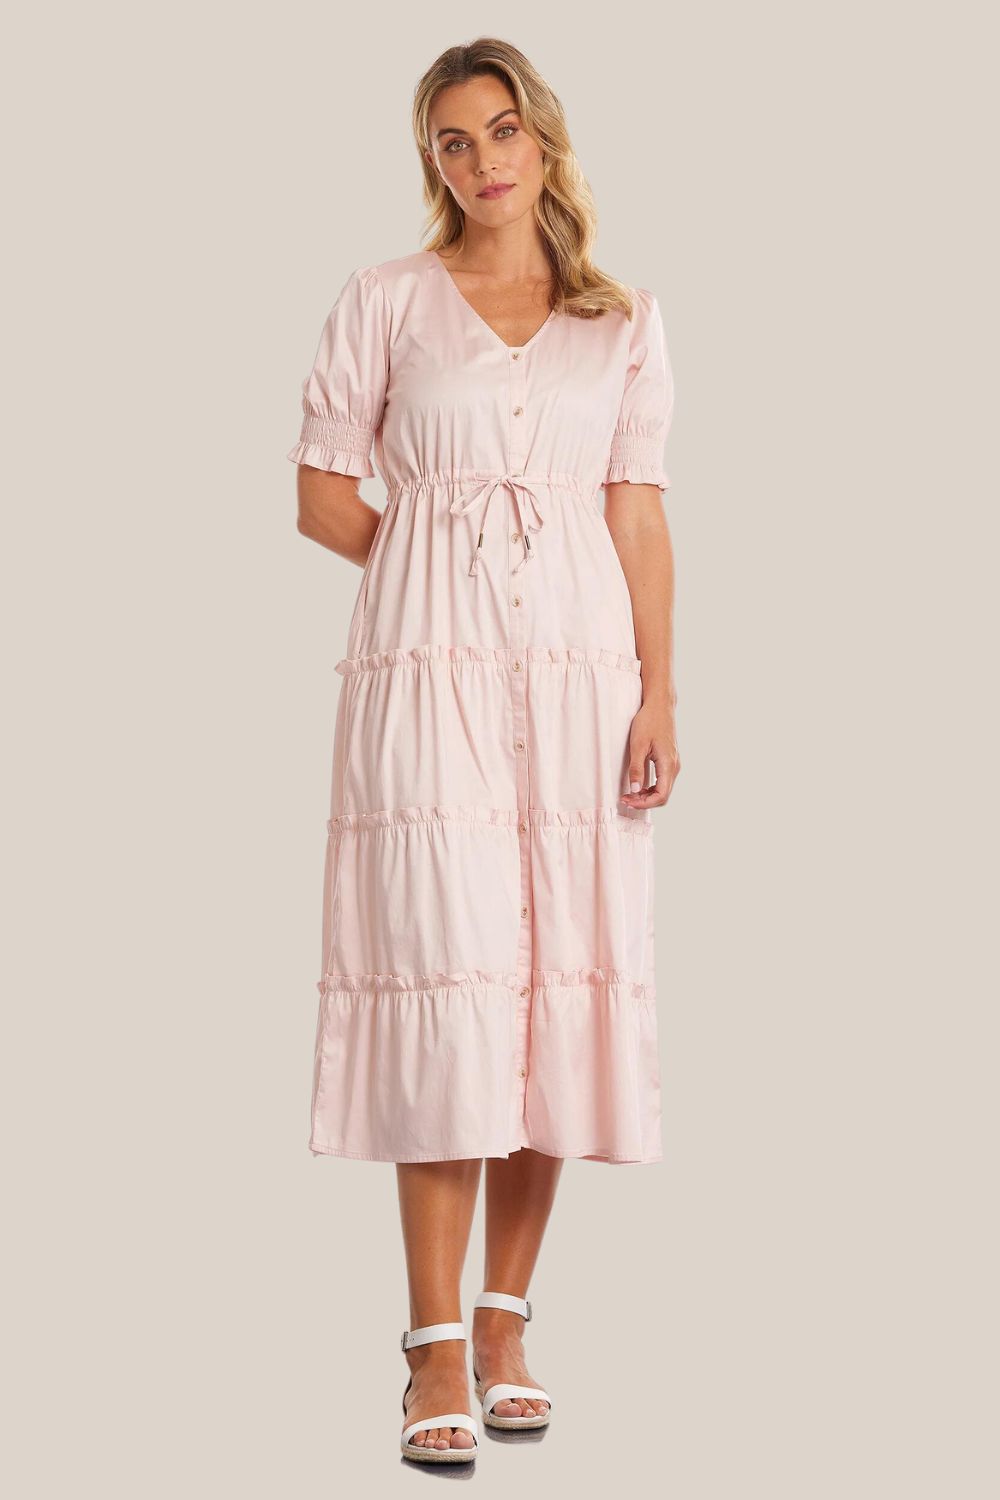 Marco Polo Tiered Maxi Dress